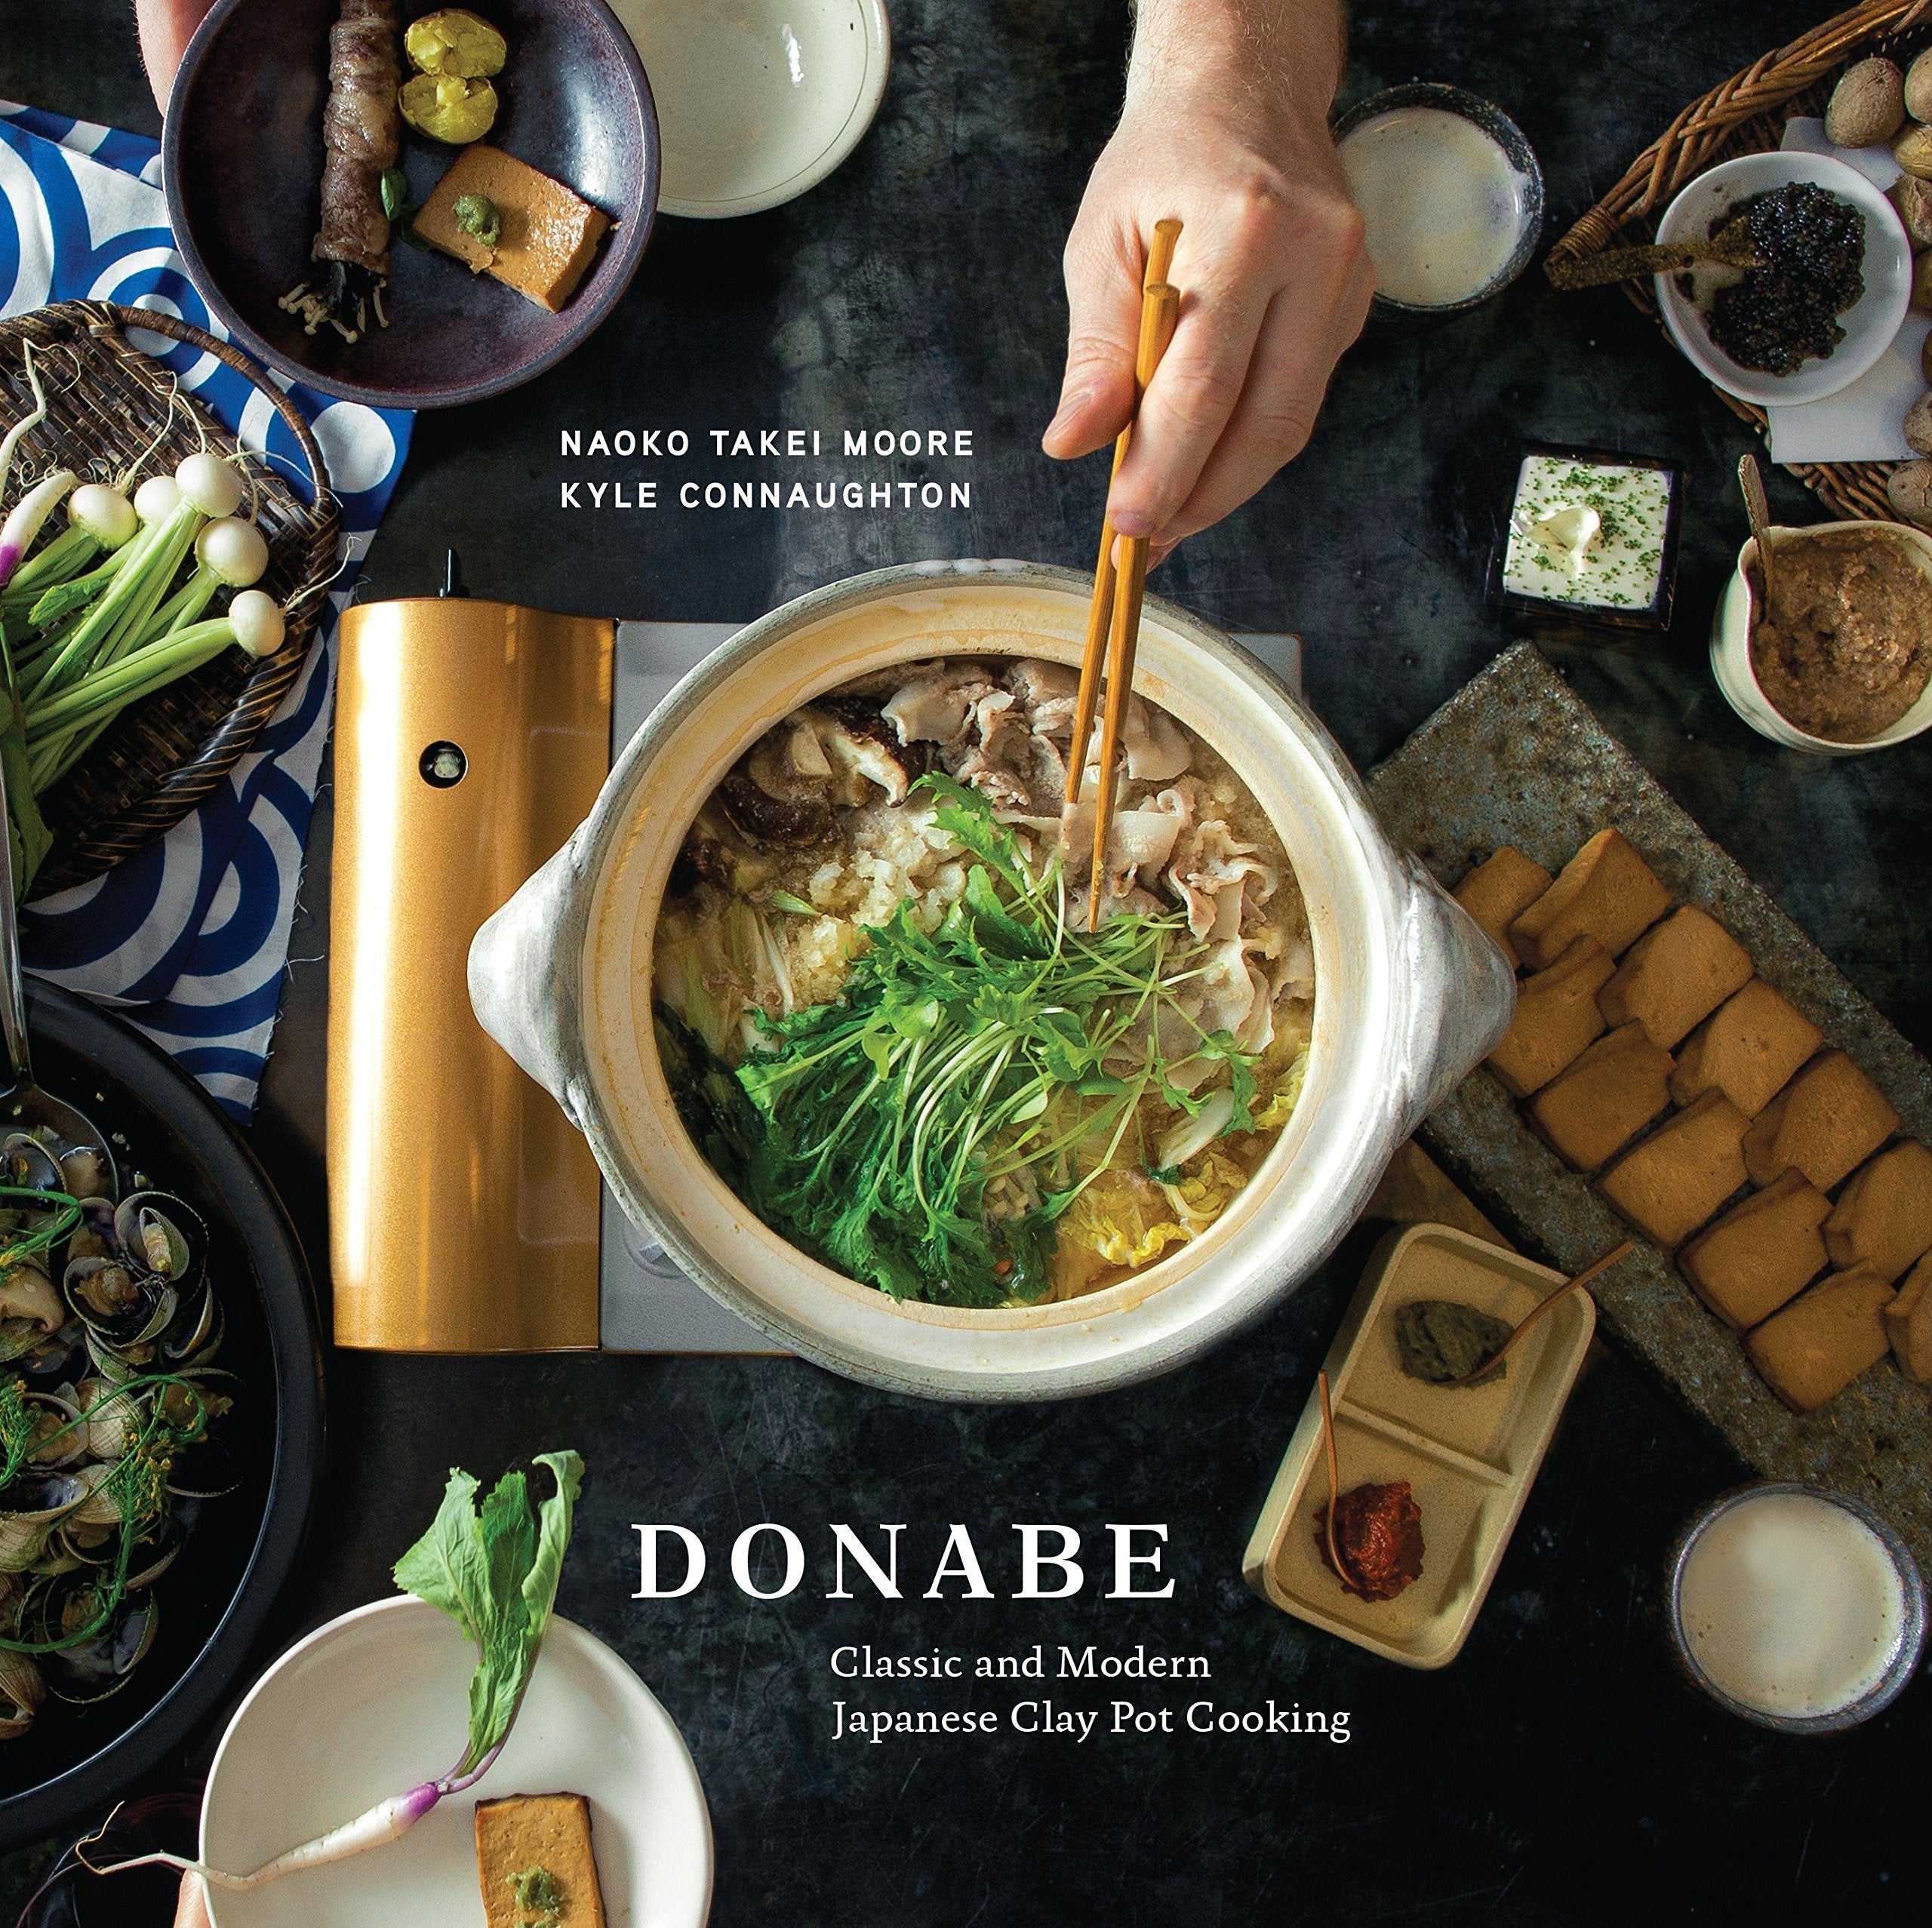 Donabe: Classic and Modern Japanese Clay Pot Cooking (Naoko Takei Moore, Kyle Connaughton)